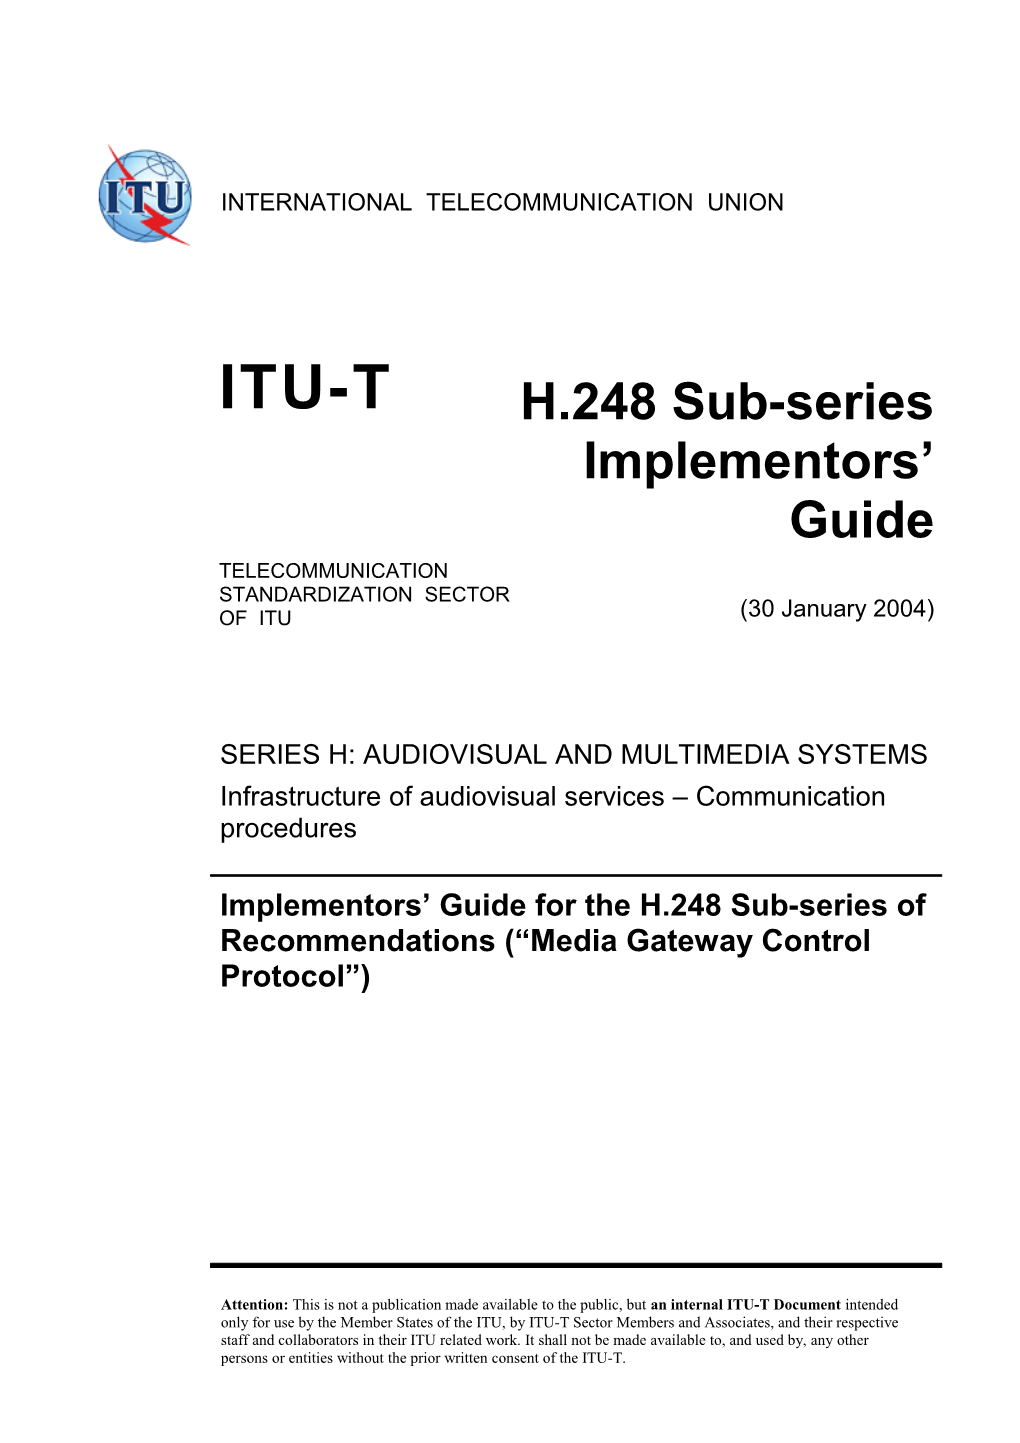 Draft H.248 Sub-Series Implementors Guide for Approval